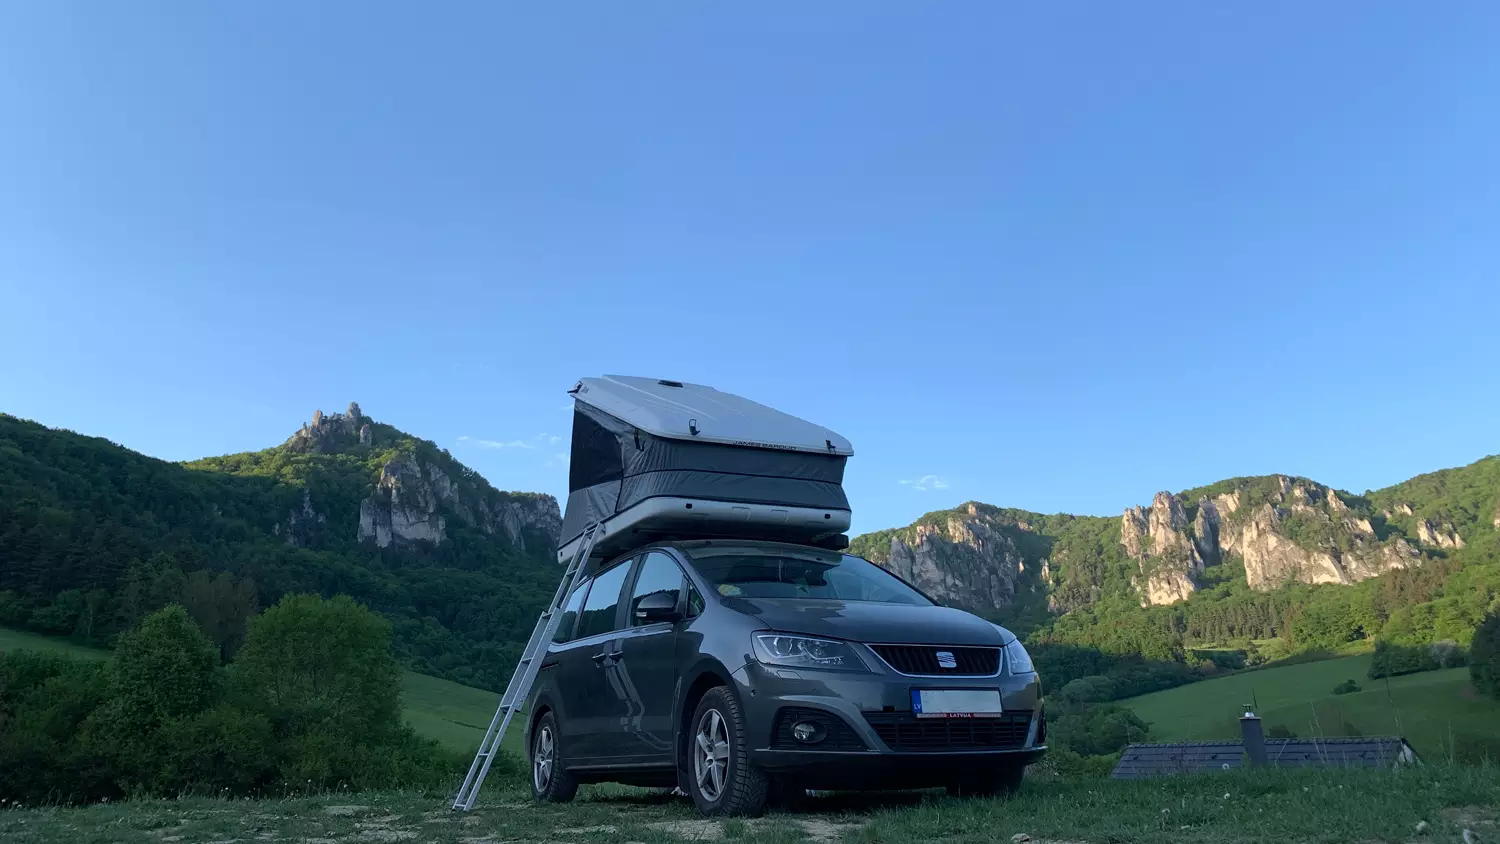 Artūrs Kozlovskis @karturs family camping with his Space rooftop tent in the Lavian landscape